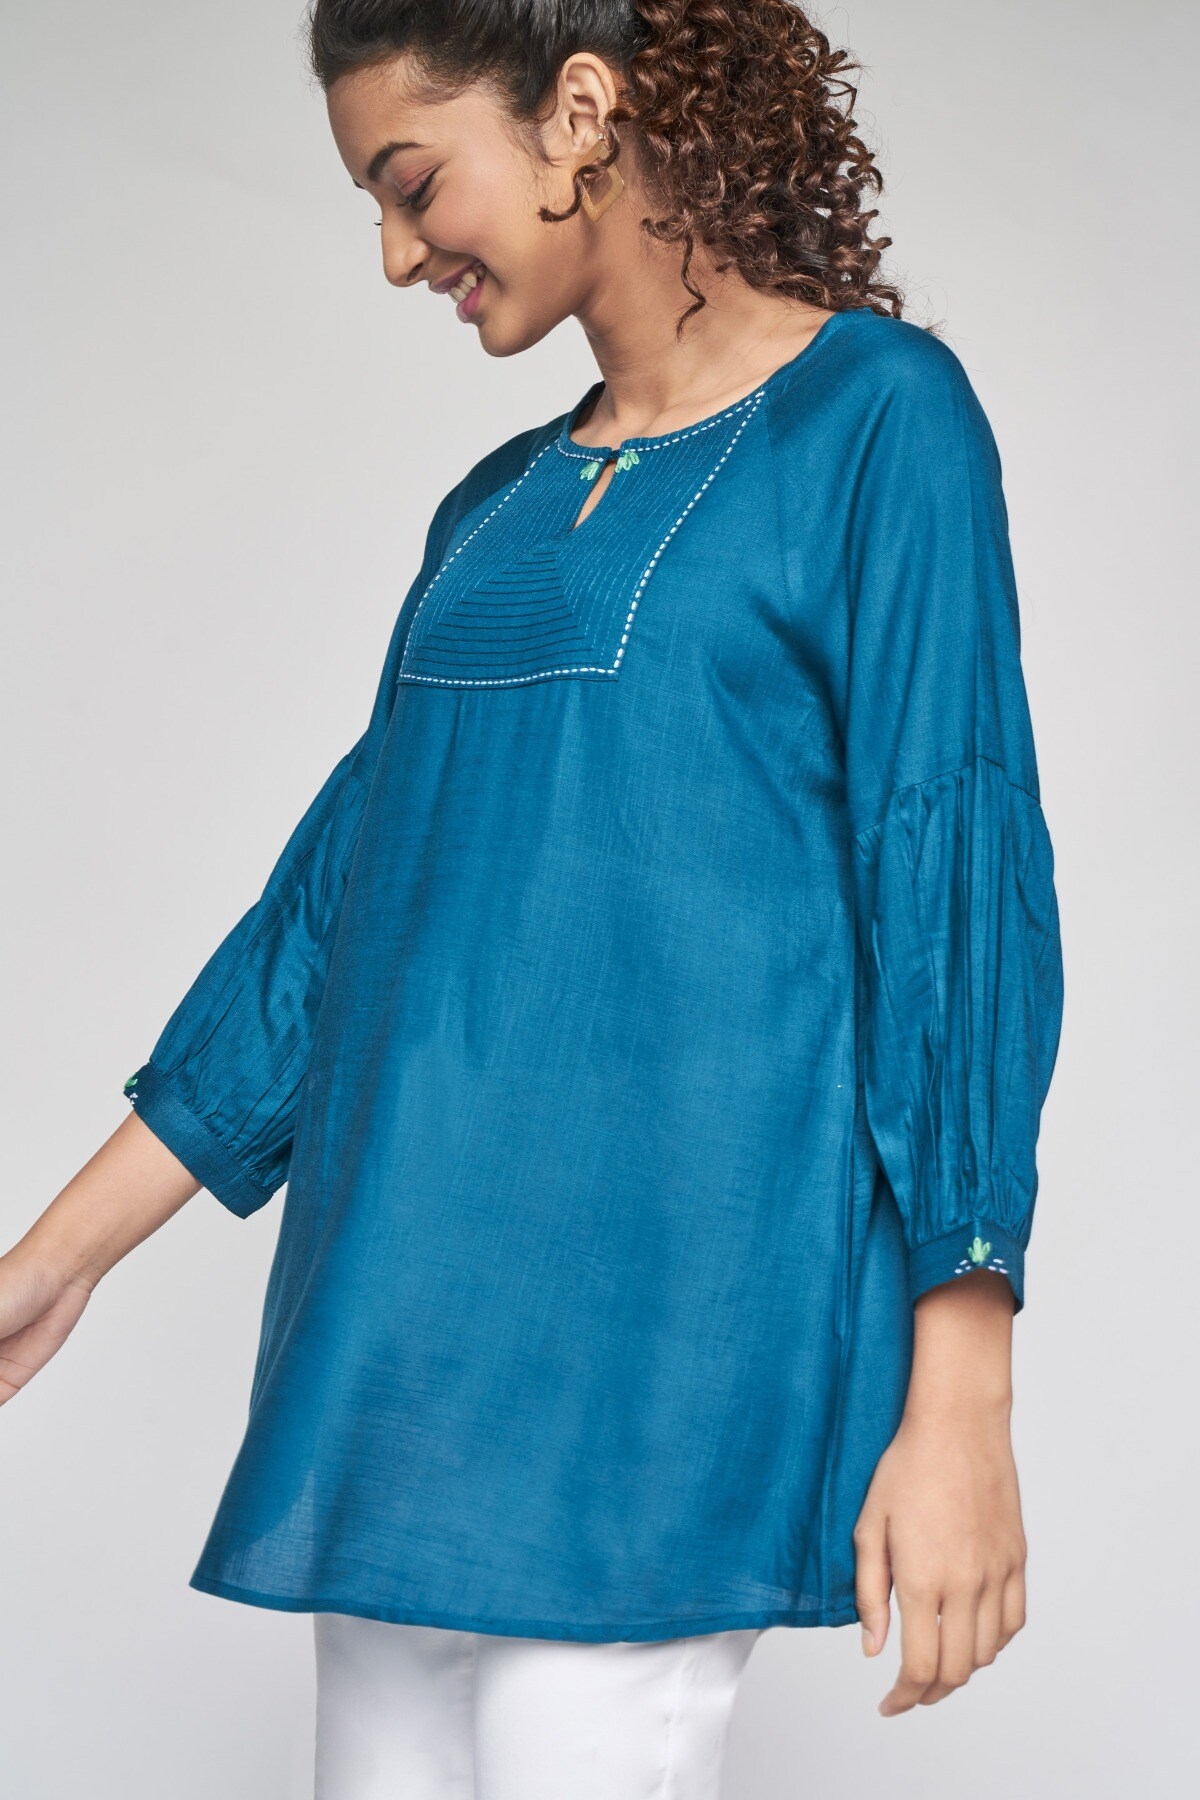 Global Desi | Teal Embroidered Fit and Flare Top 3